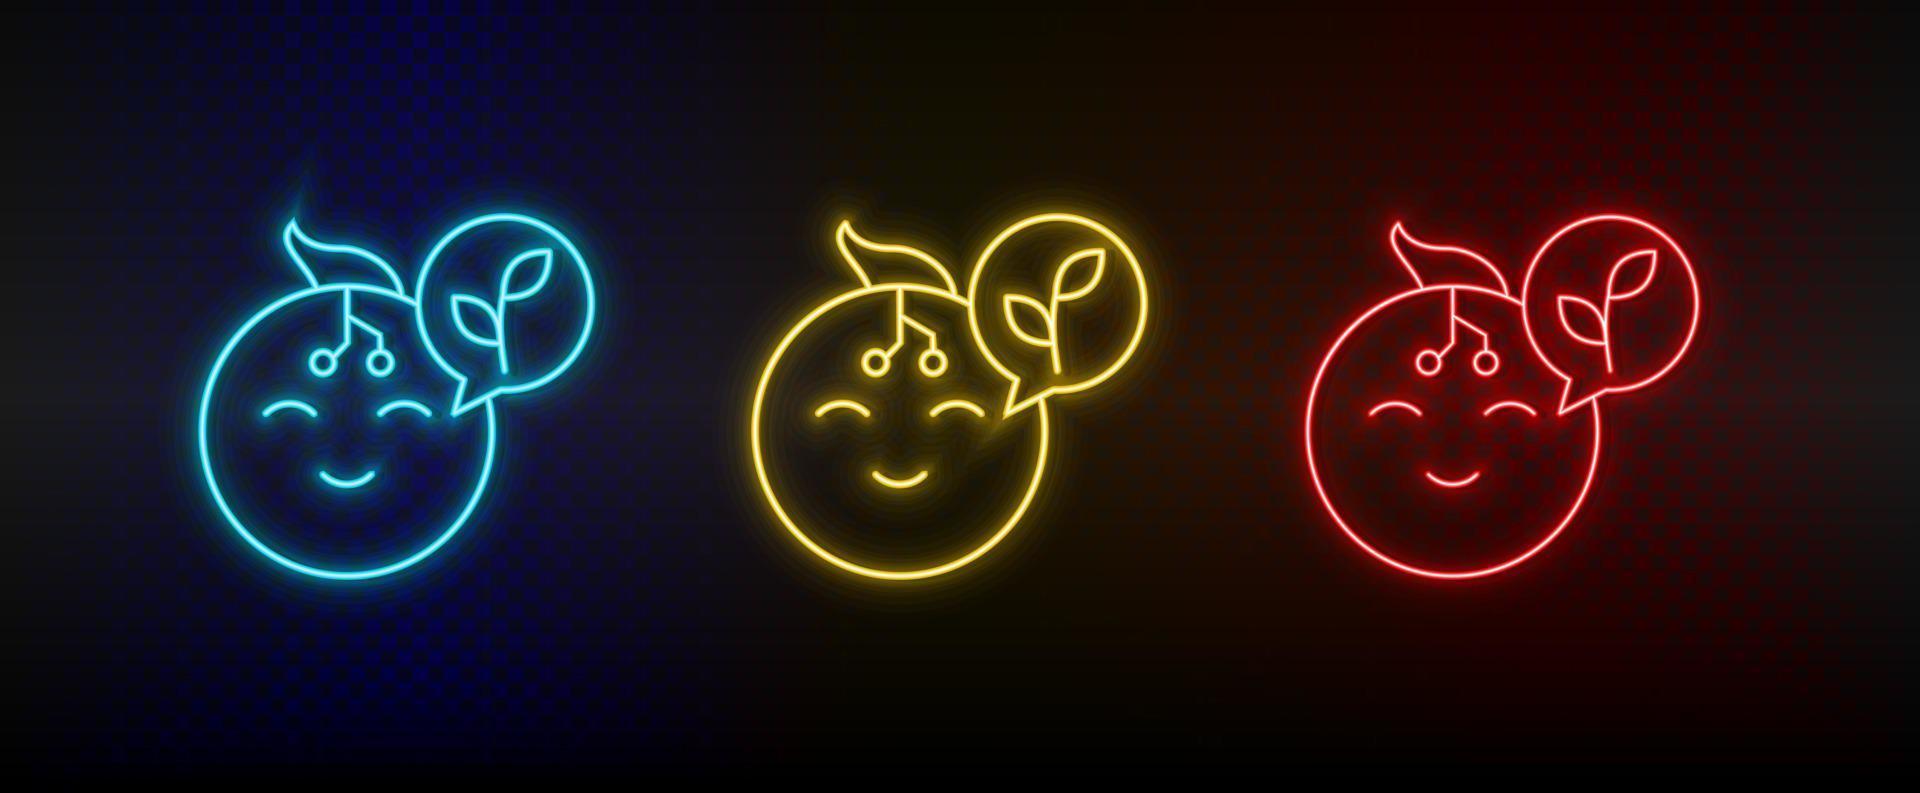 Neon icons. robot baby intelligence. Set of red, blue, yellow neon vector icon on darken background